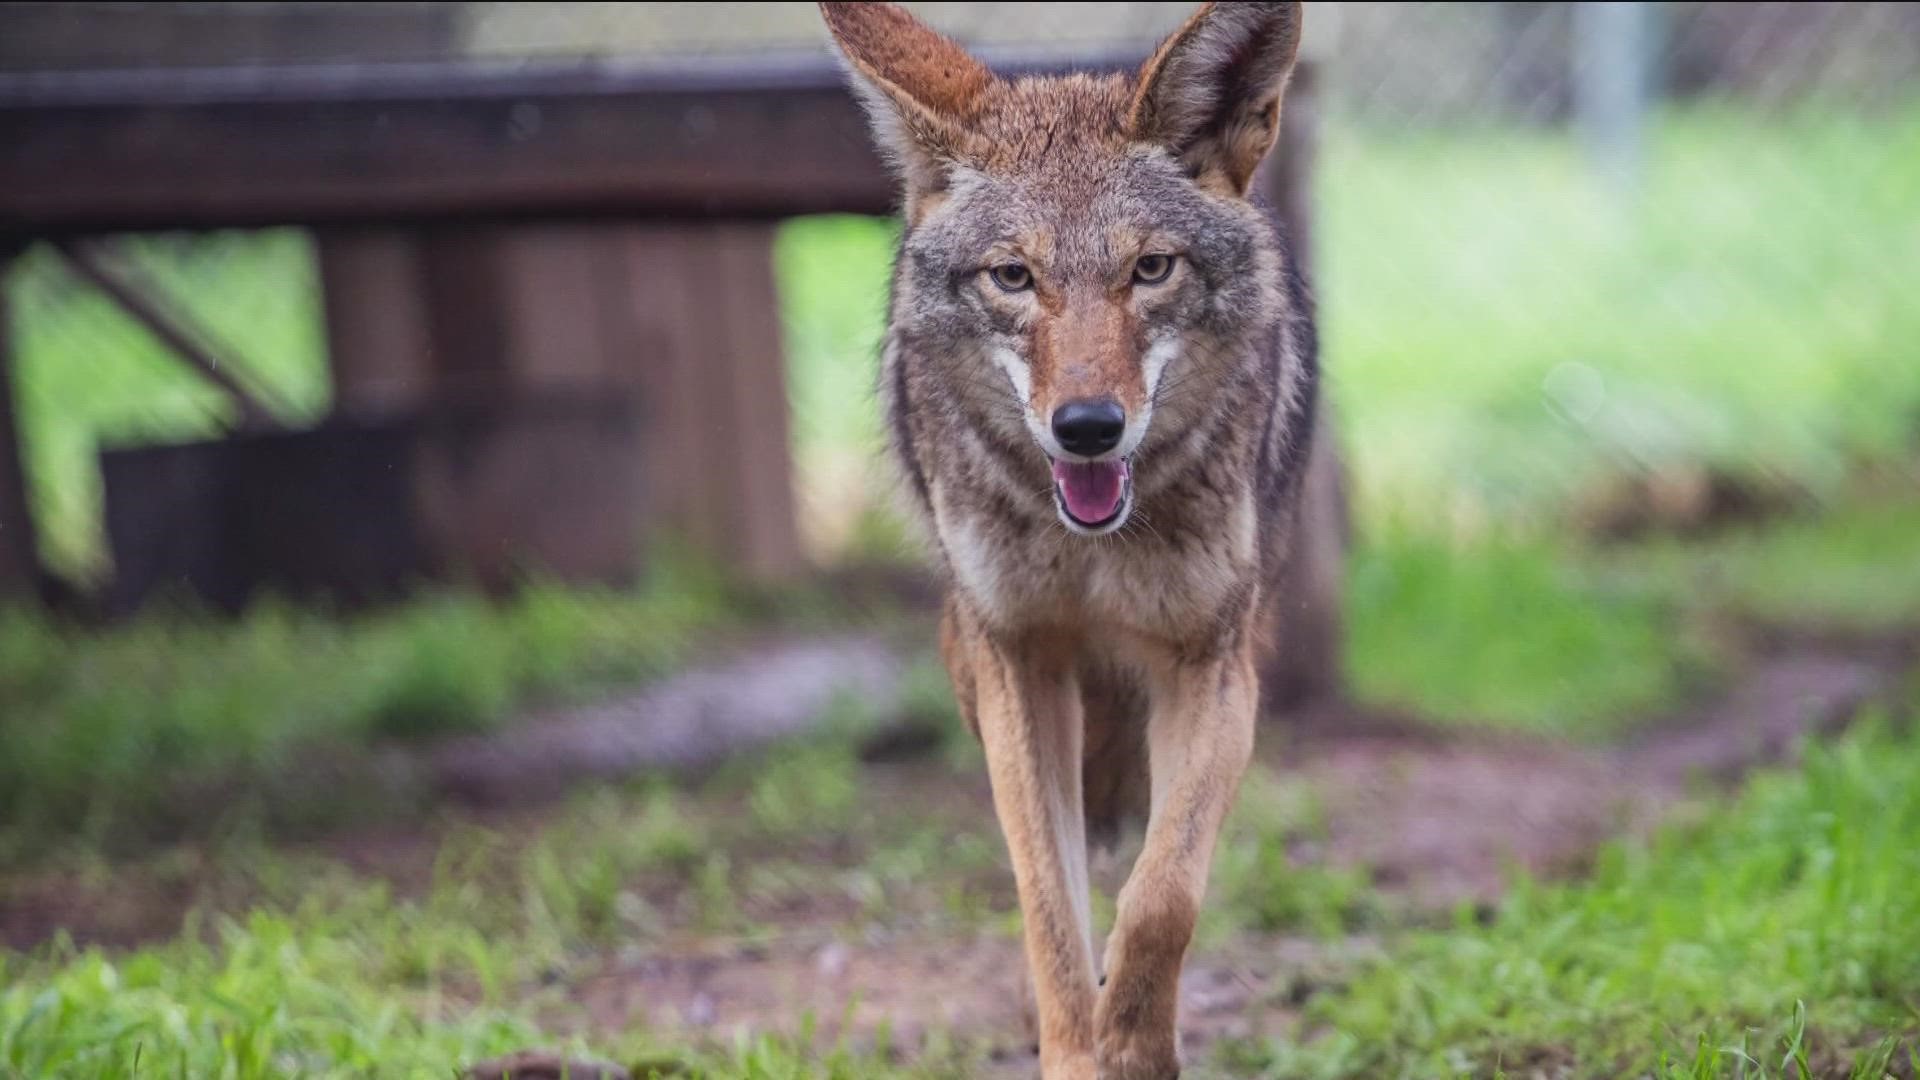 January-March is breeding season for coyotes, which may result in higher sighting reports.